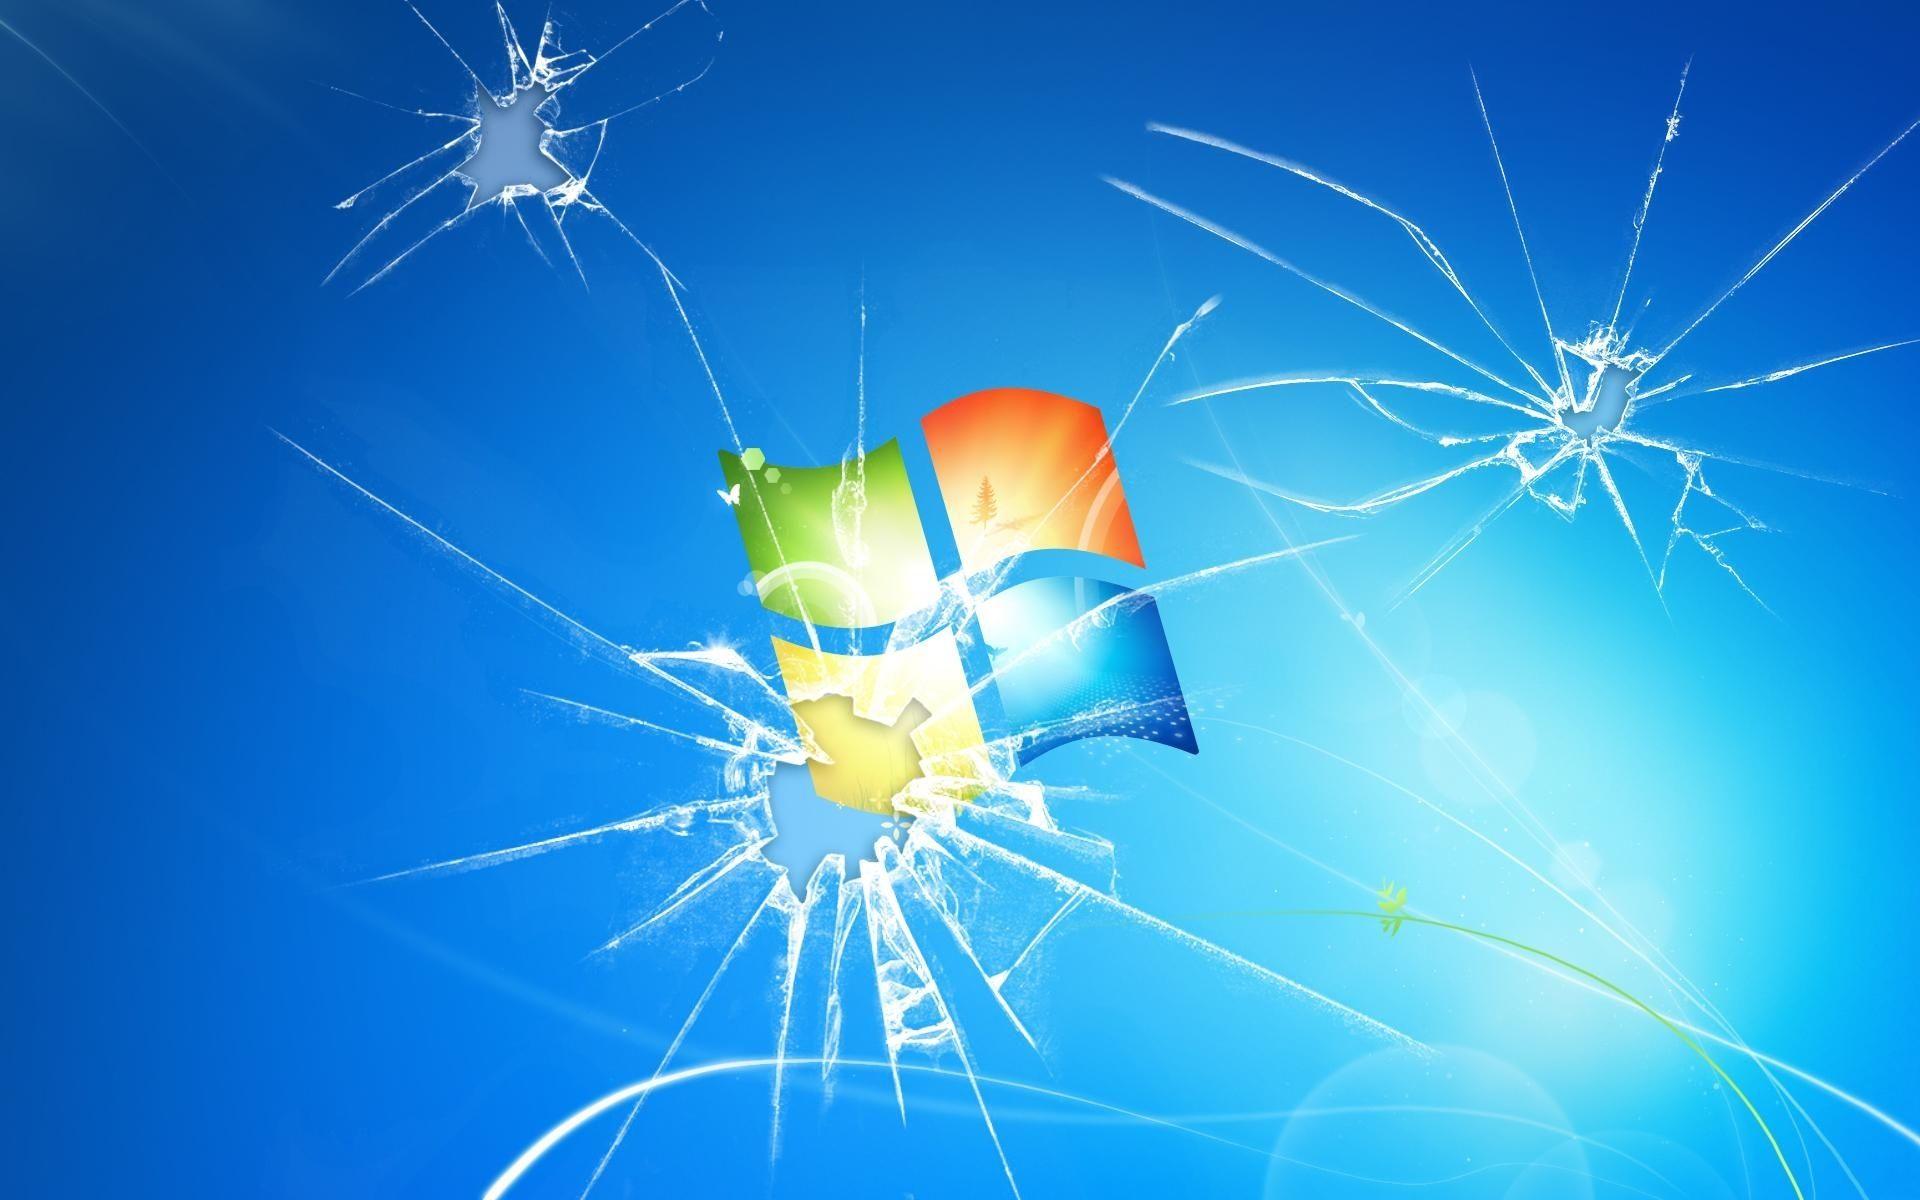 Cracked Windows Backgrounds - Wallpaper Cave